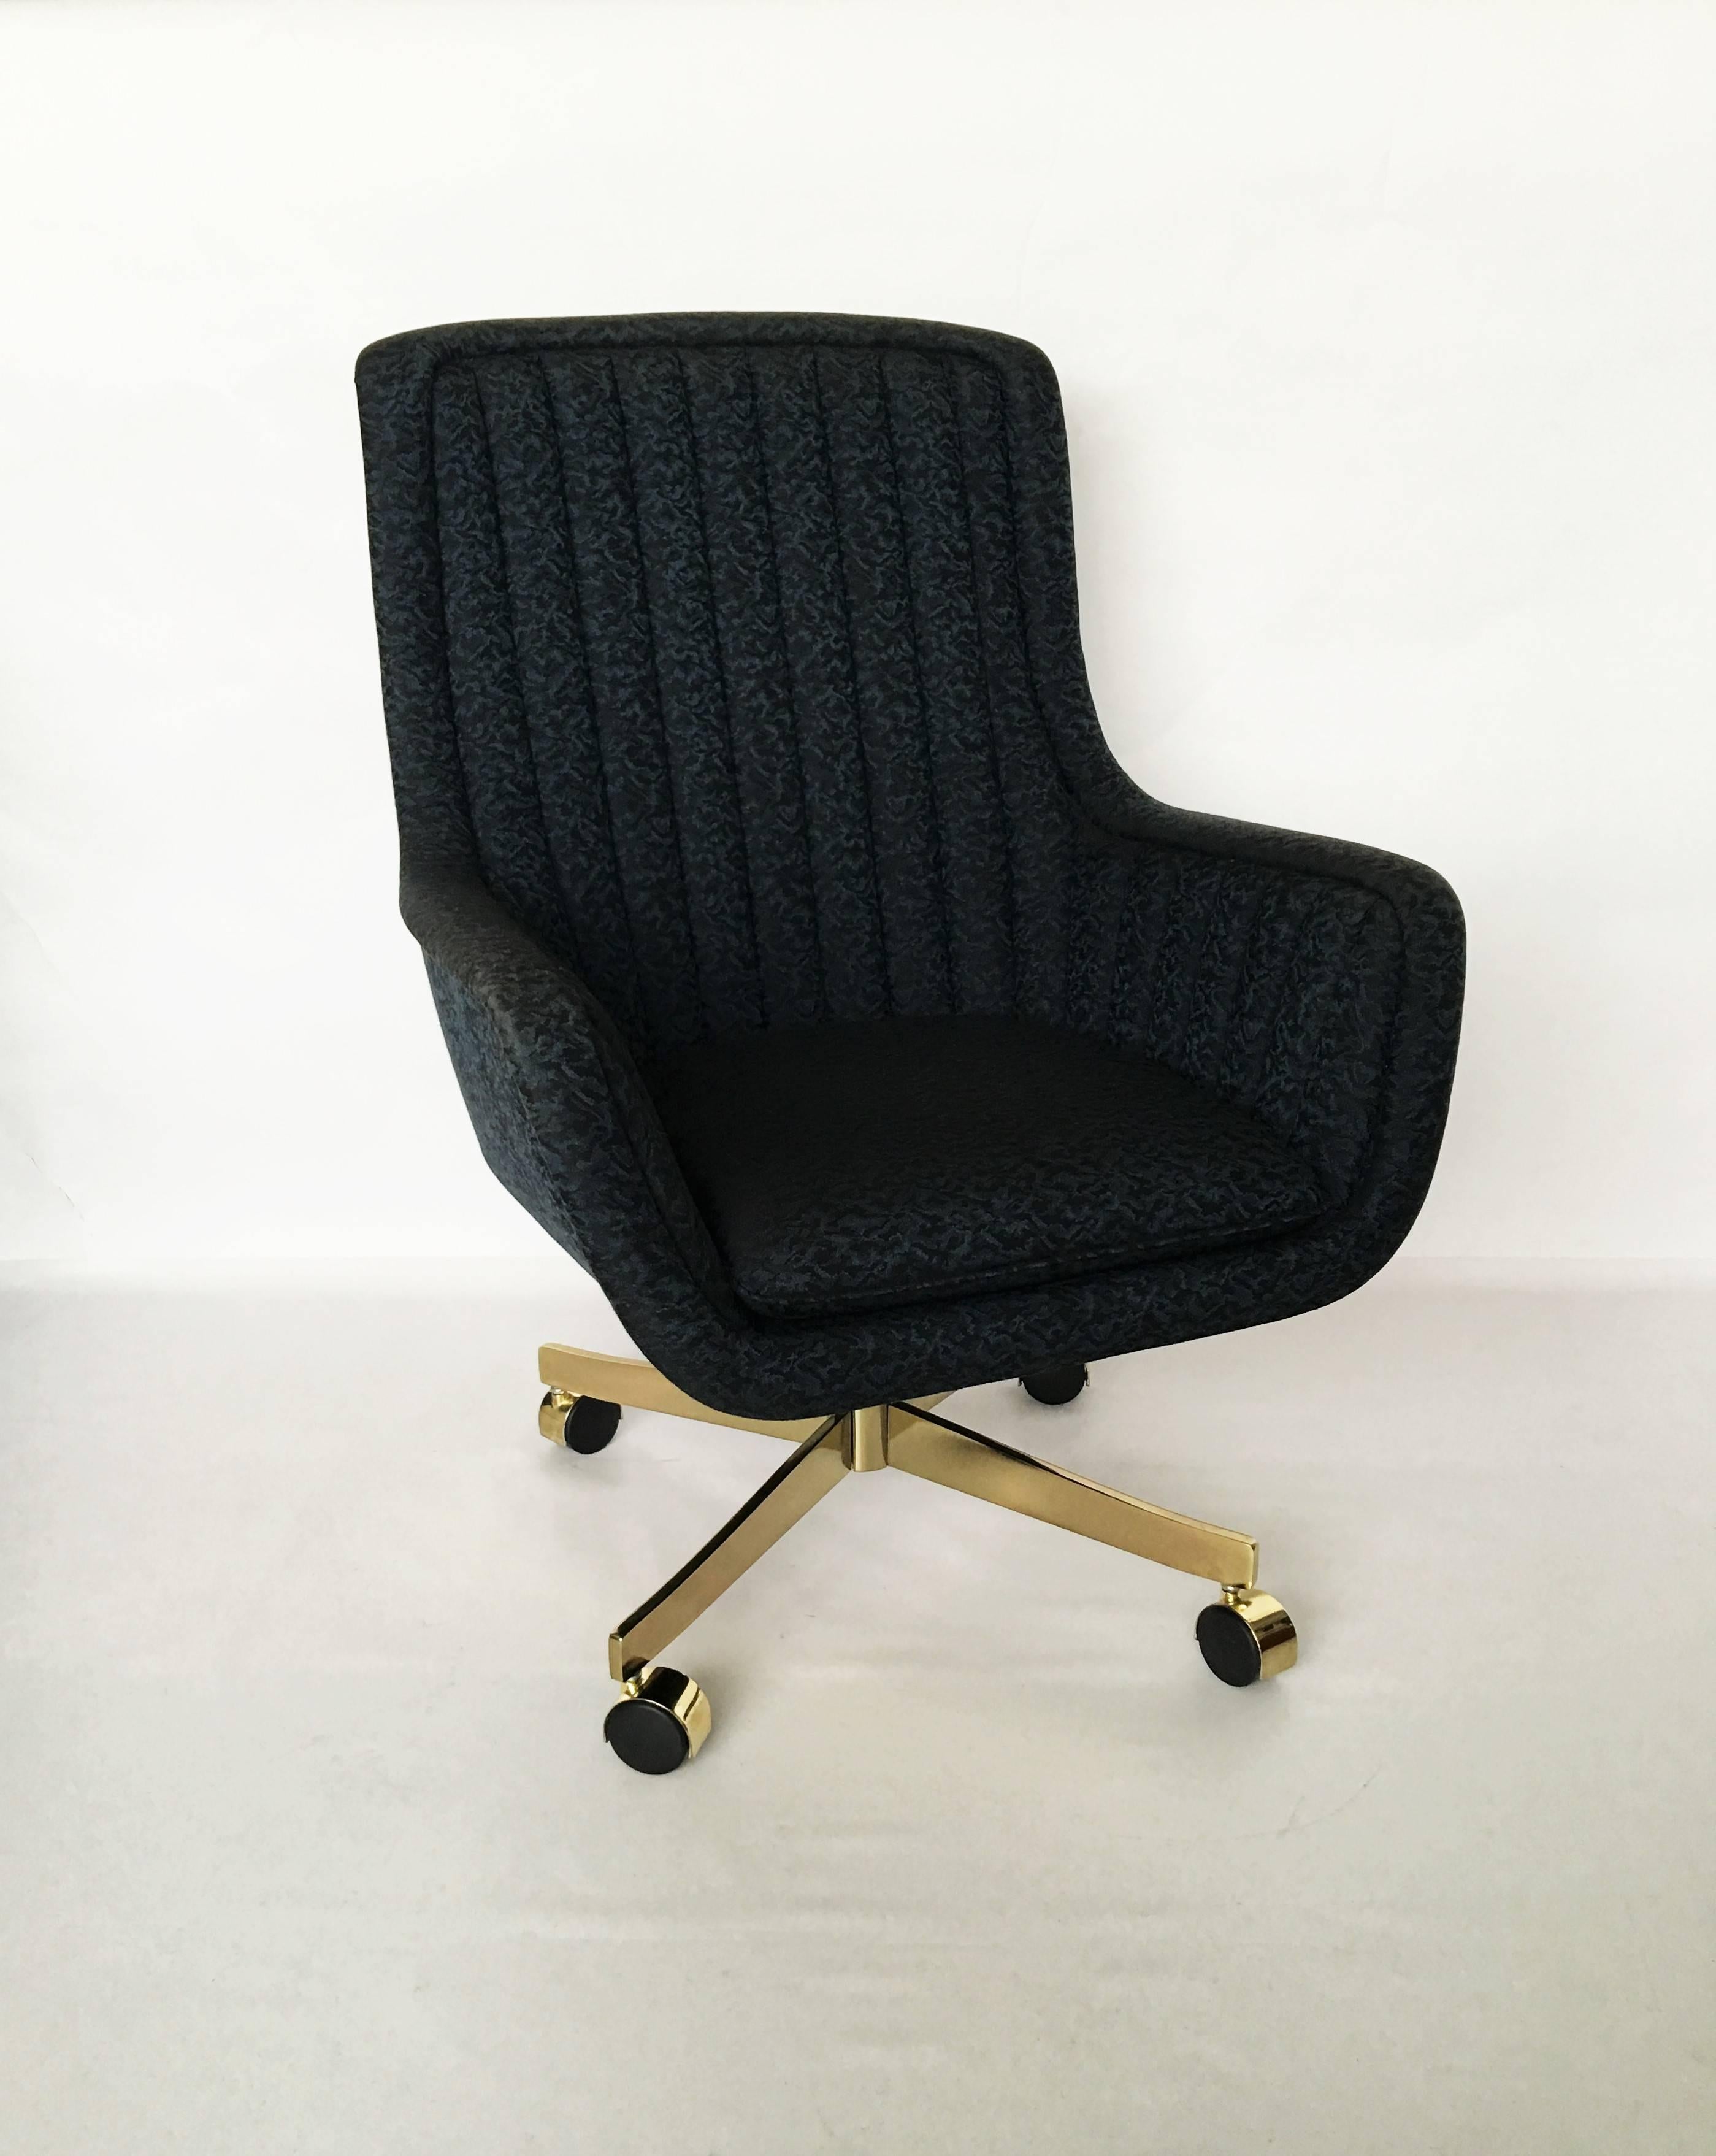 Eight high-quality swivel chairs designed by Ward Bennett, American, 1917-2004 for Brickel Associates, circa 1984. In excellent vintage condition, these chairs are incredibly comfortable and have beautifully stitched. They're on four extended brass